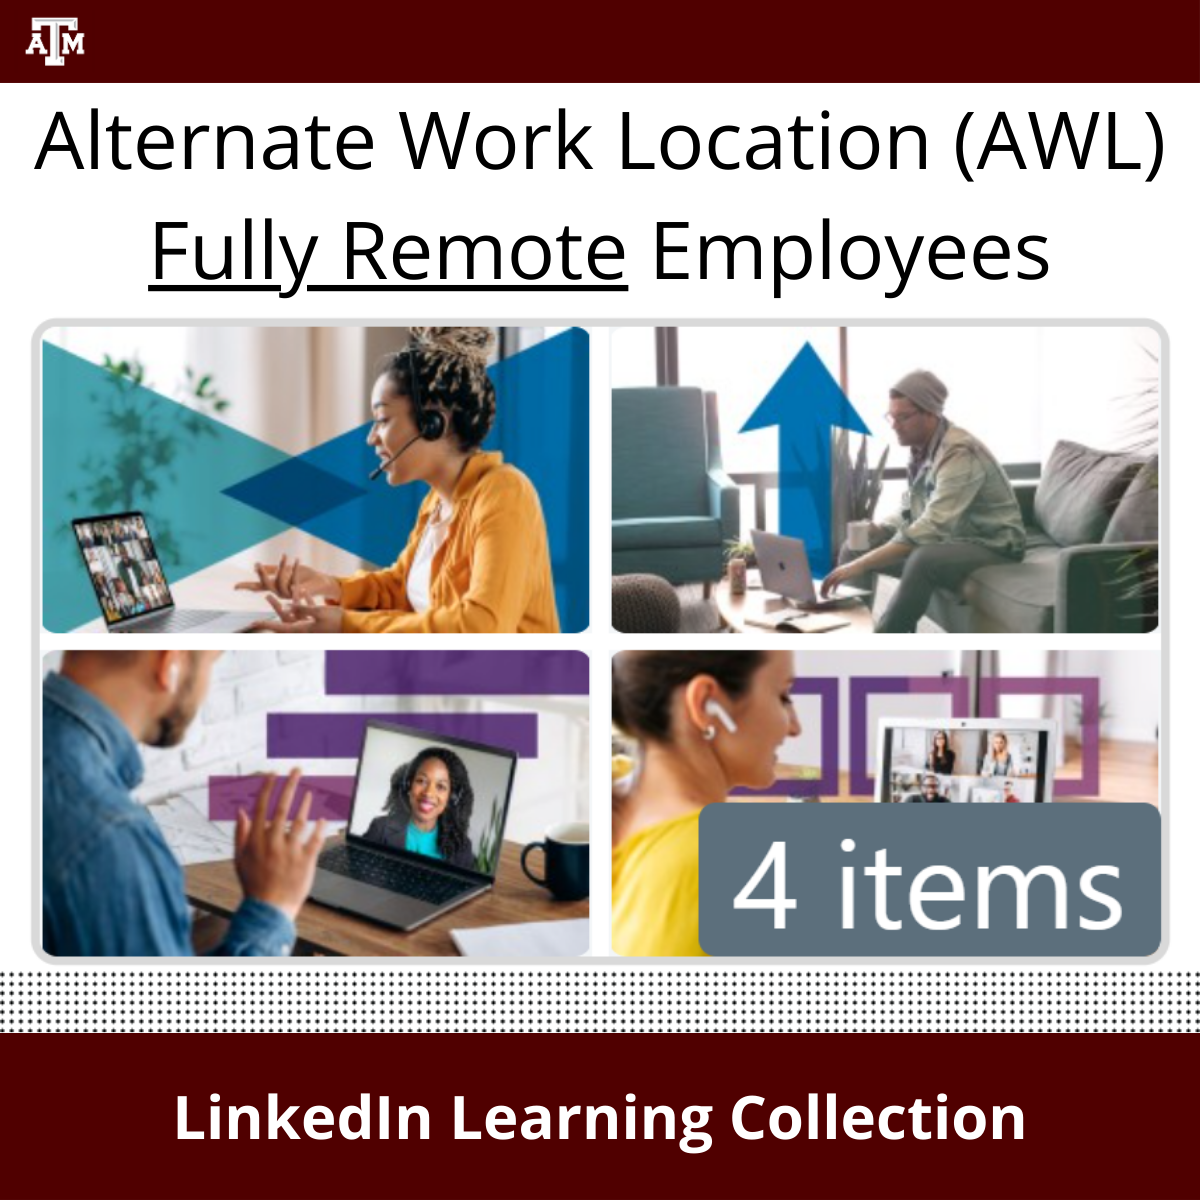 LinkedIn Learning Collection:  AWL Fully Remote